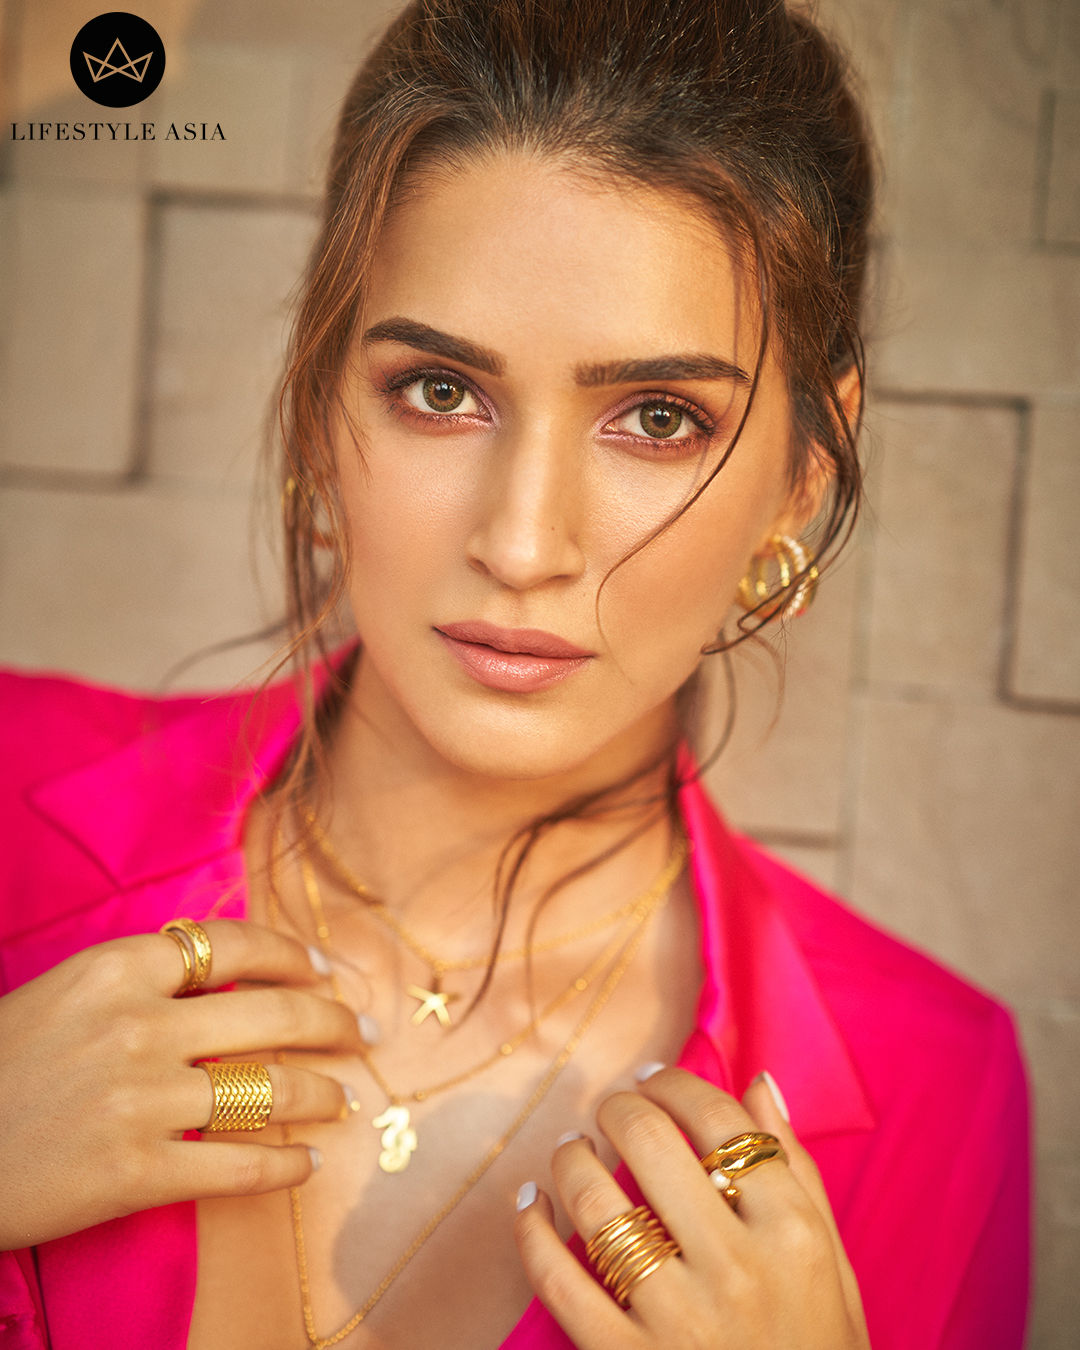 All the pictures from Kriti Sanon's July cover shoot with LSA India